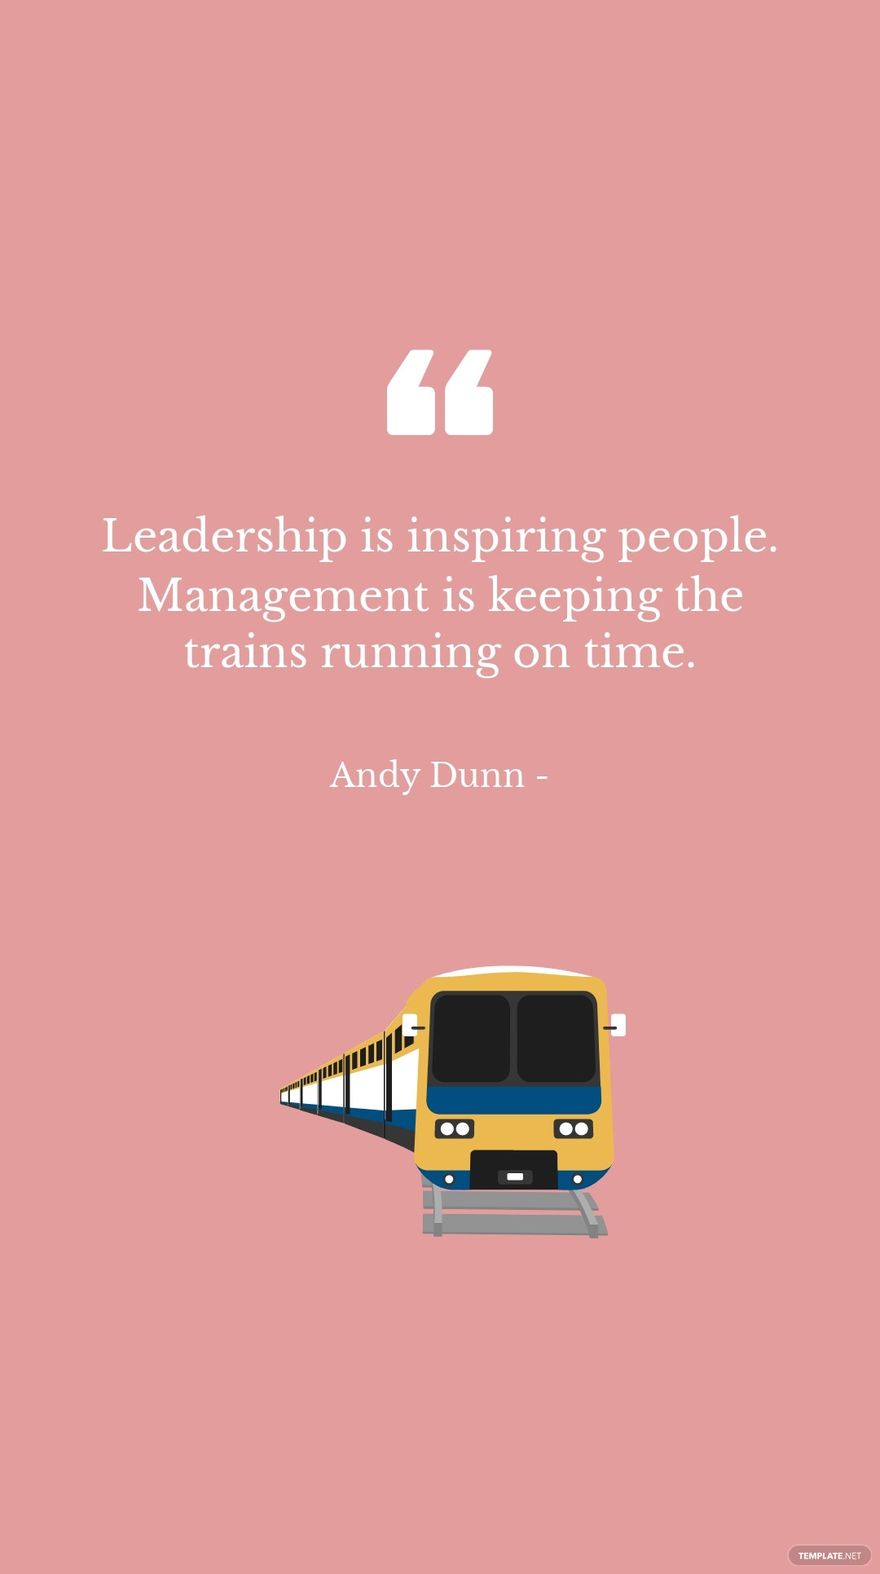 Andy Dunn - Leadership is inspiring people. Management is keeping the trains running on time. in JPG